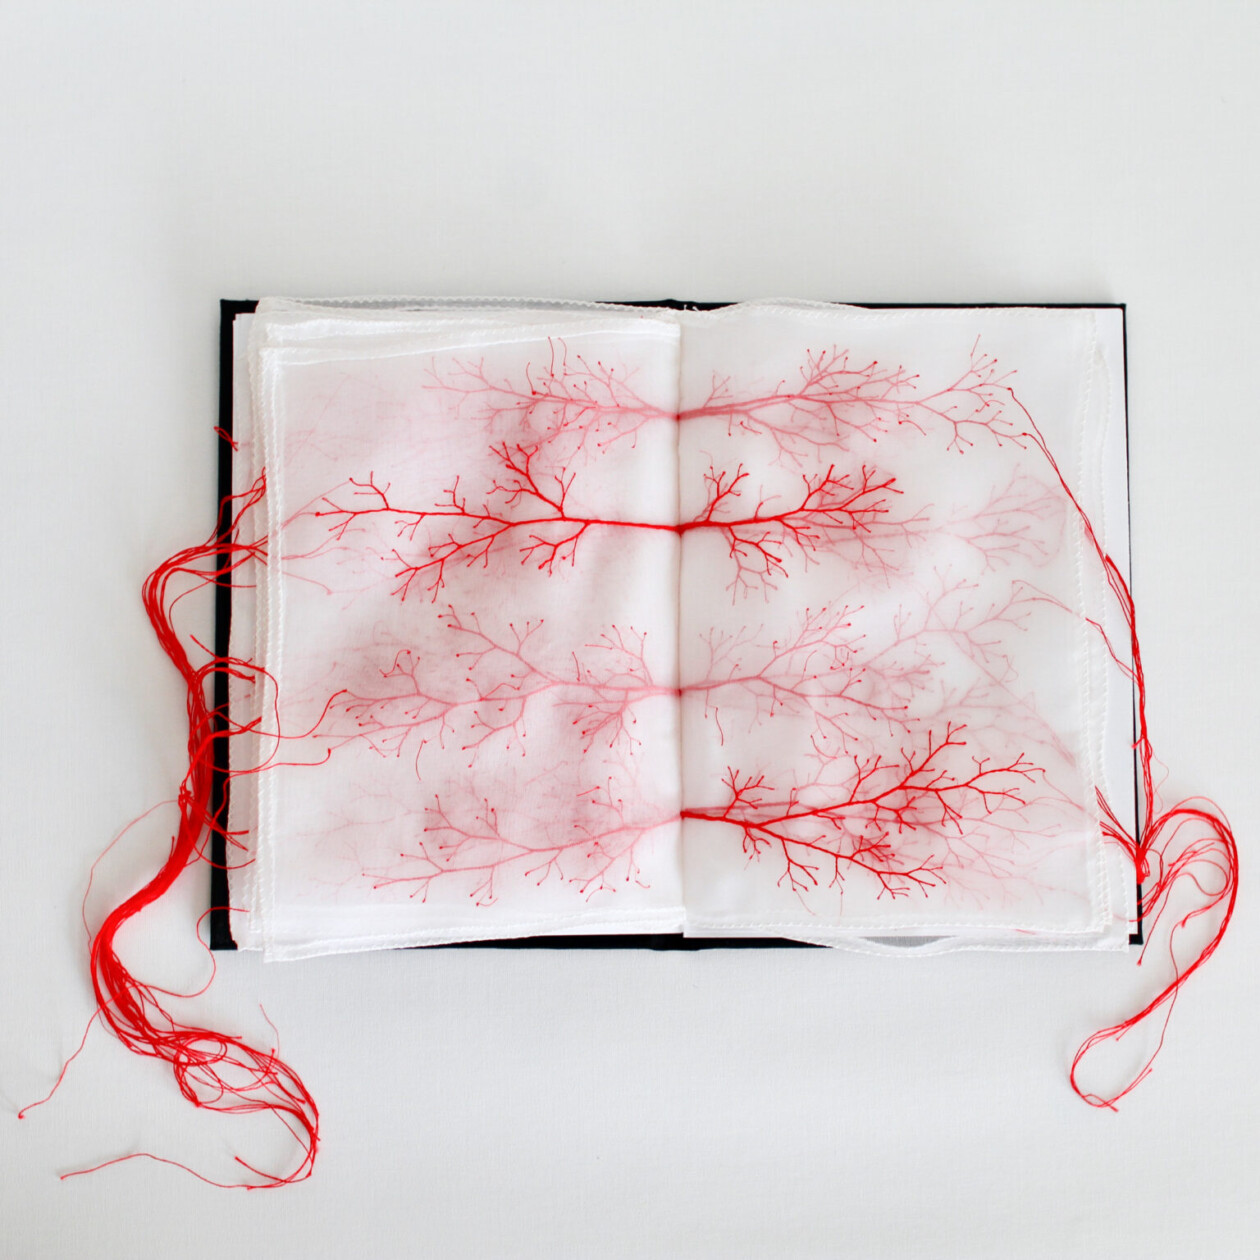 Red Threads, Intriguing Mixed Media Sculptures By Rima Day (12)